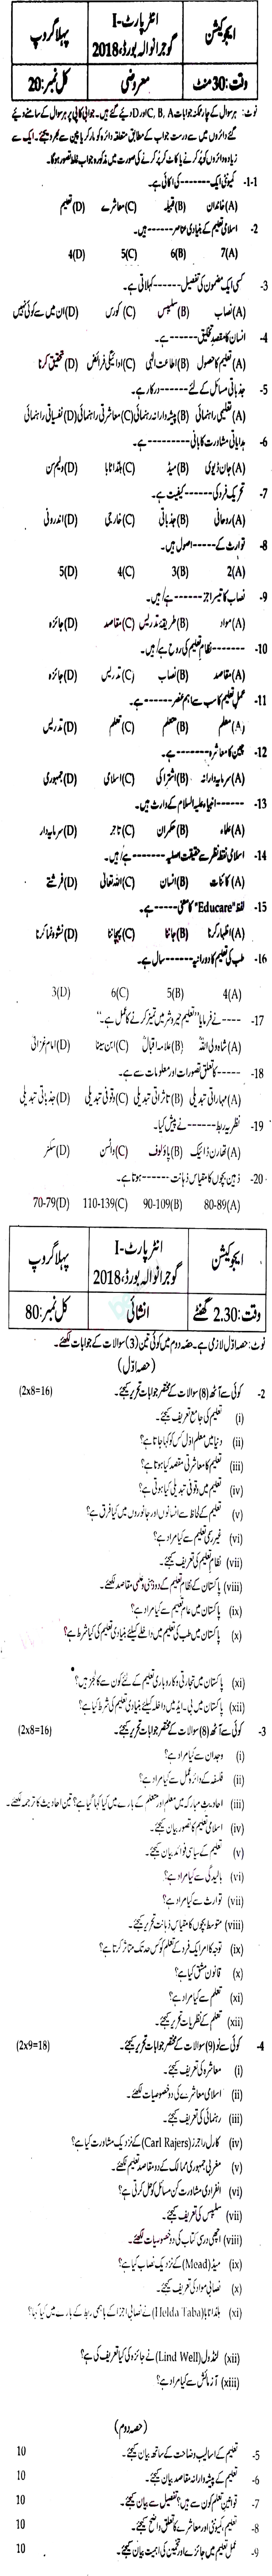 Education FA Part 1 Past Paper Group 1 BISE Gujranwala 2018